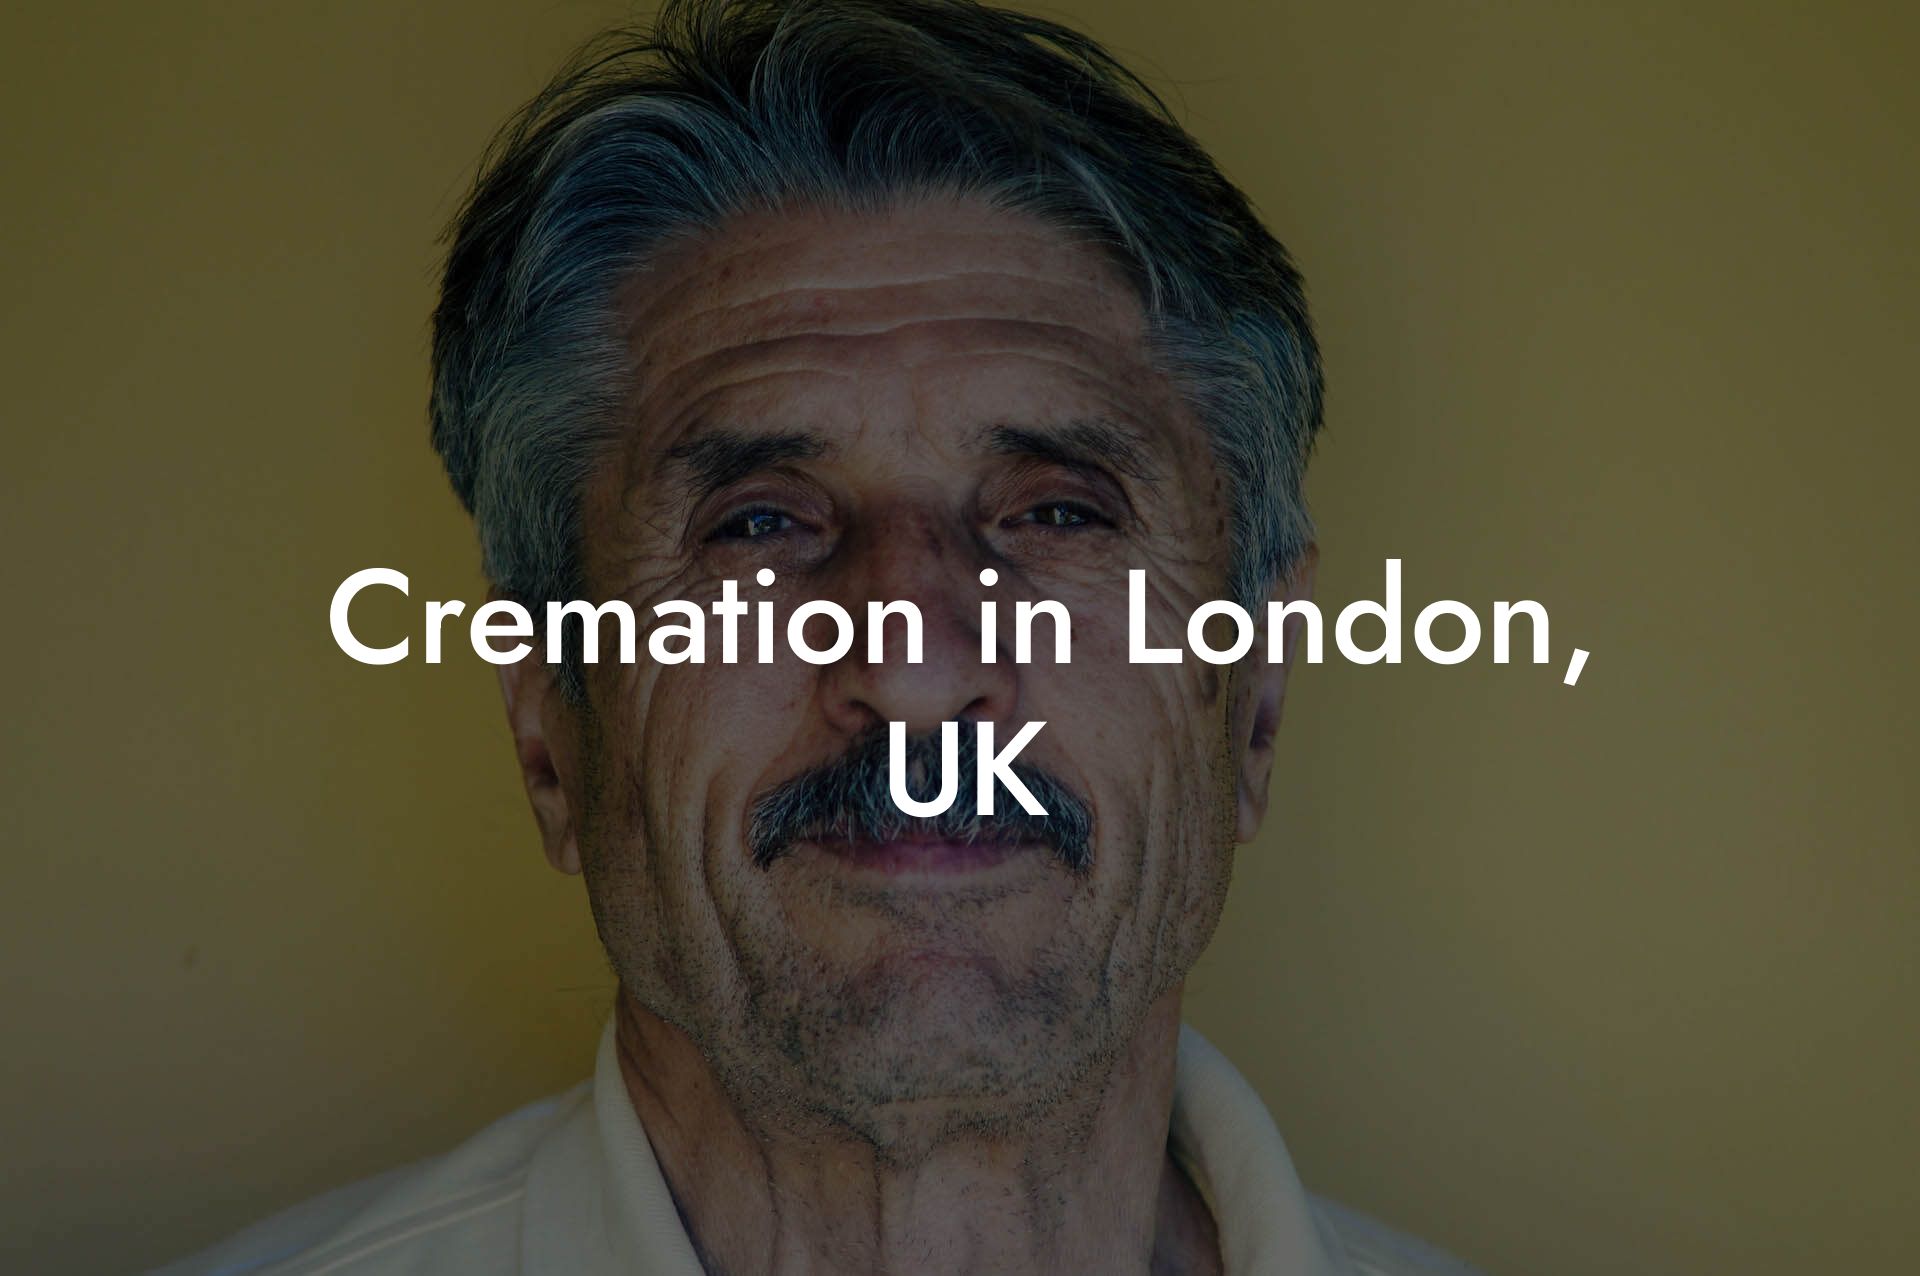 Cremation in London, UK